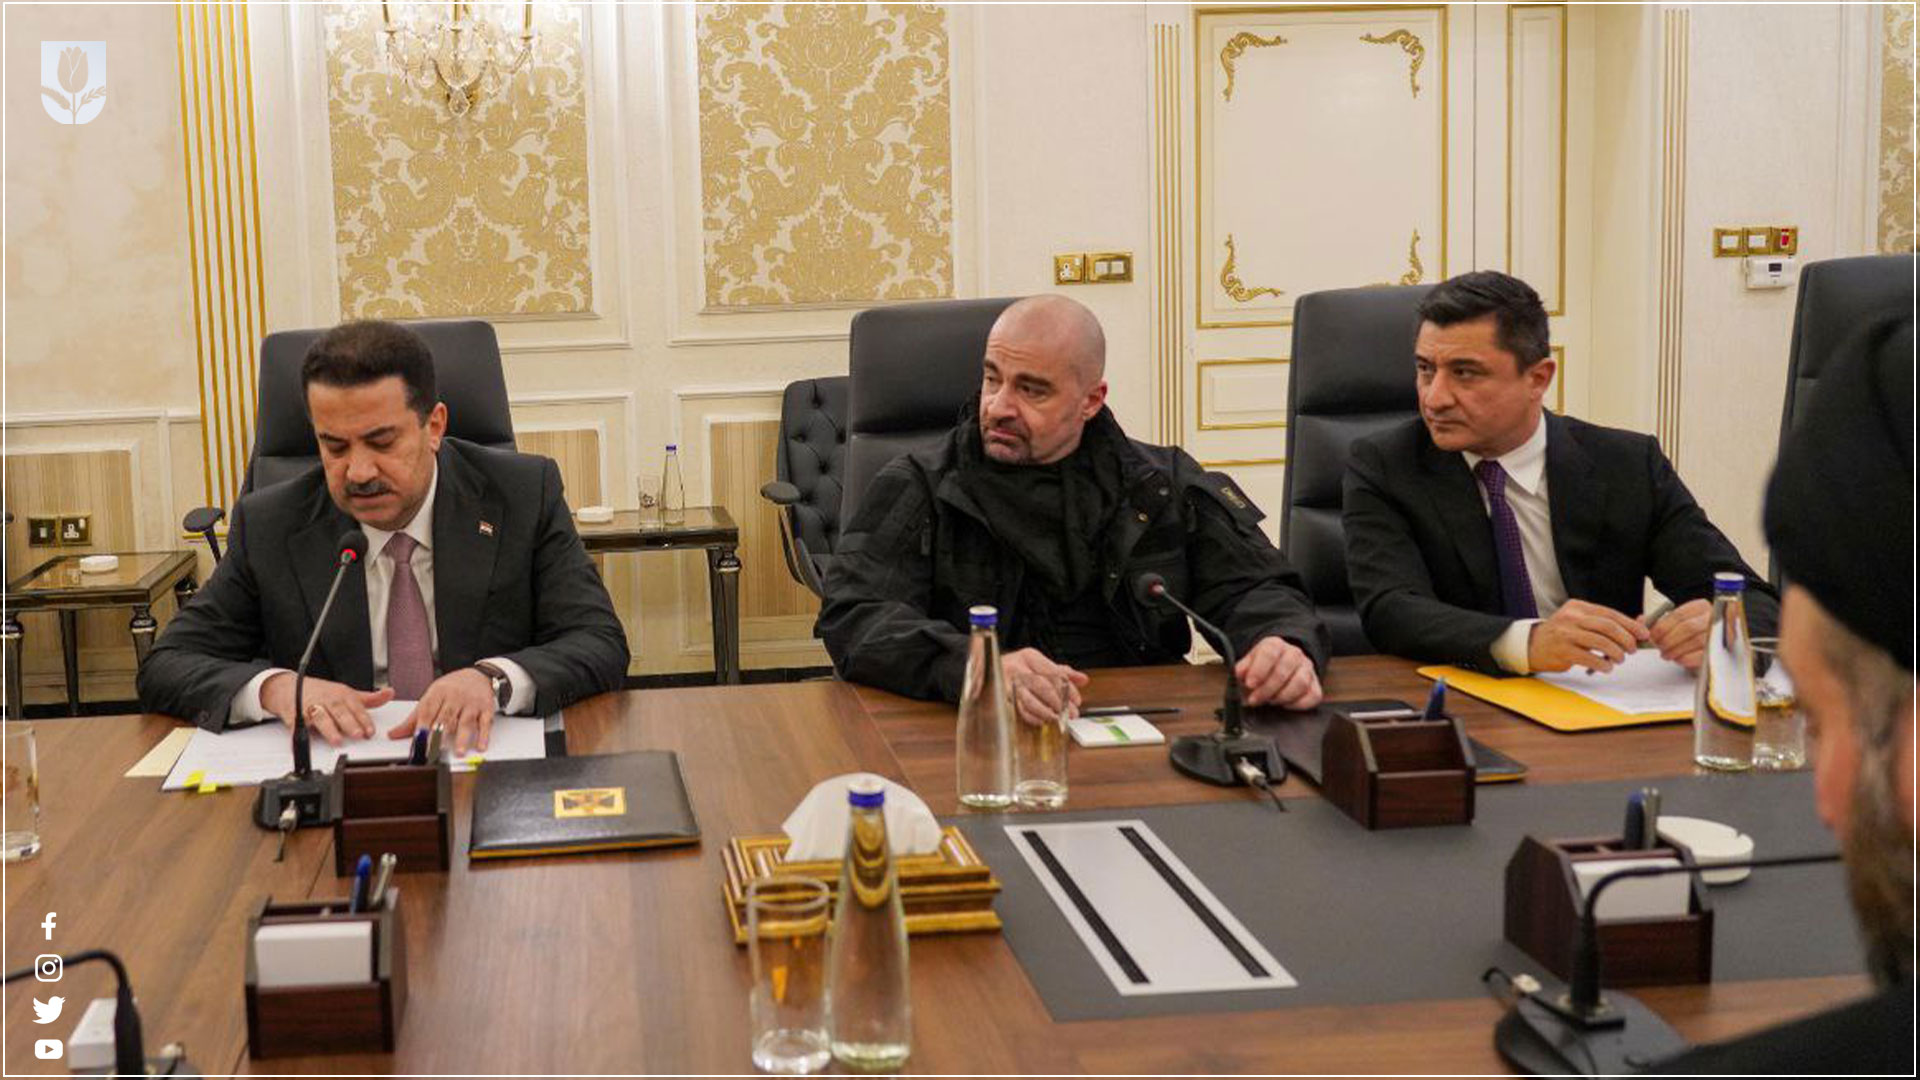  President Bafel in the middle, Iraqi Prime Minister on the left and Iraq's Justice Minister on the right. PUKMEDIA